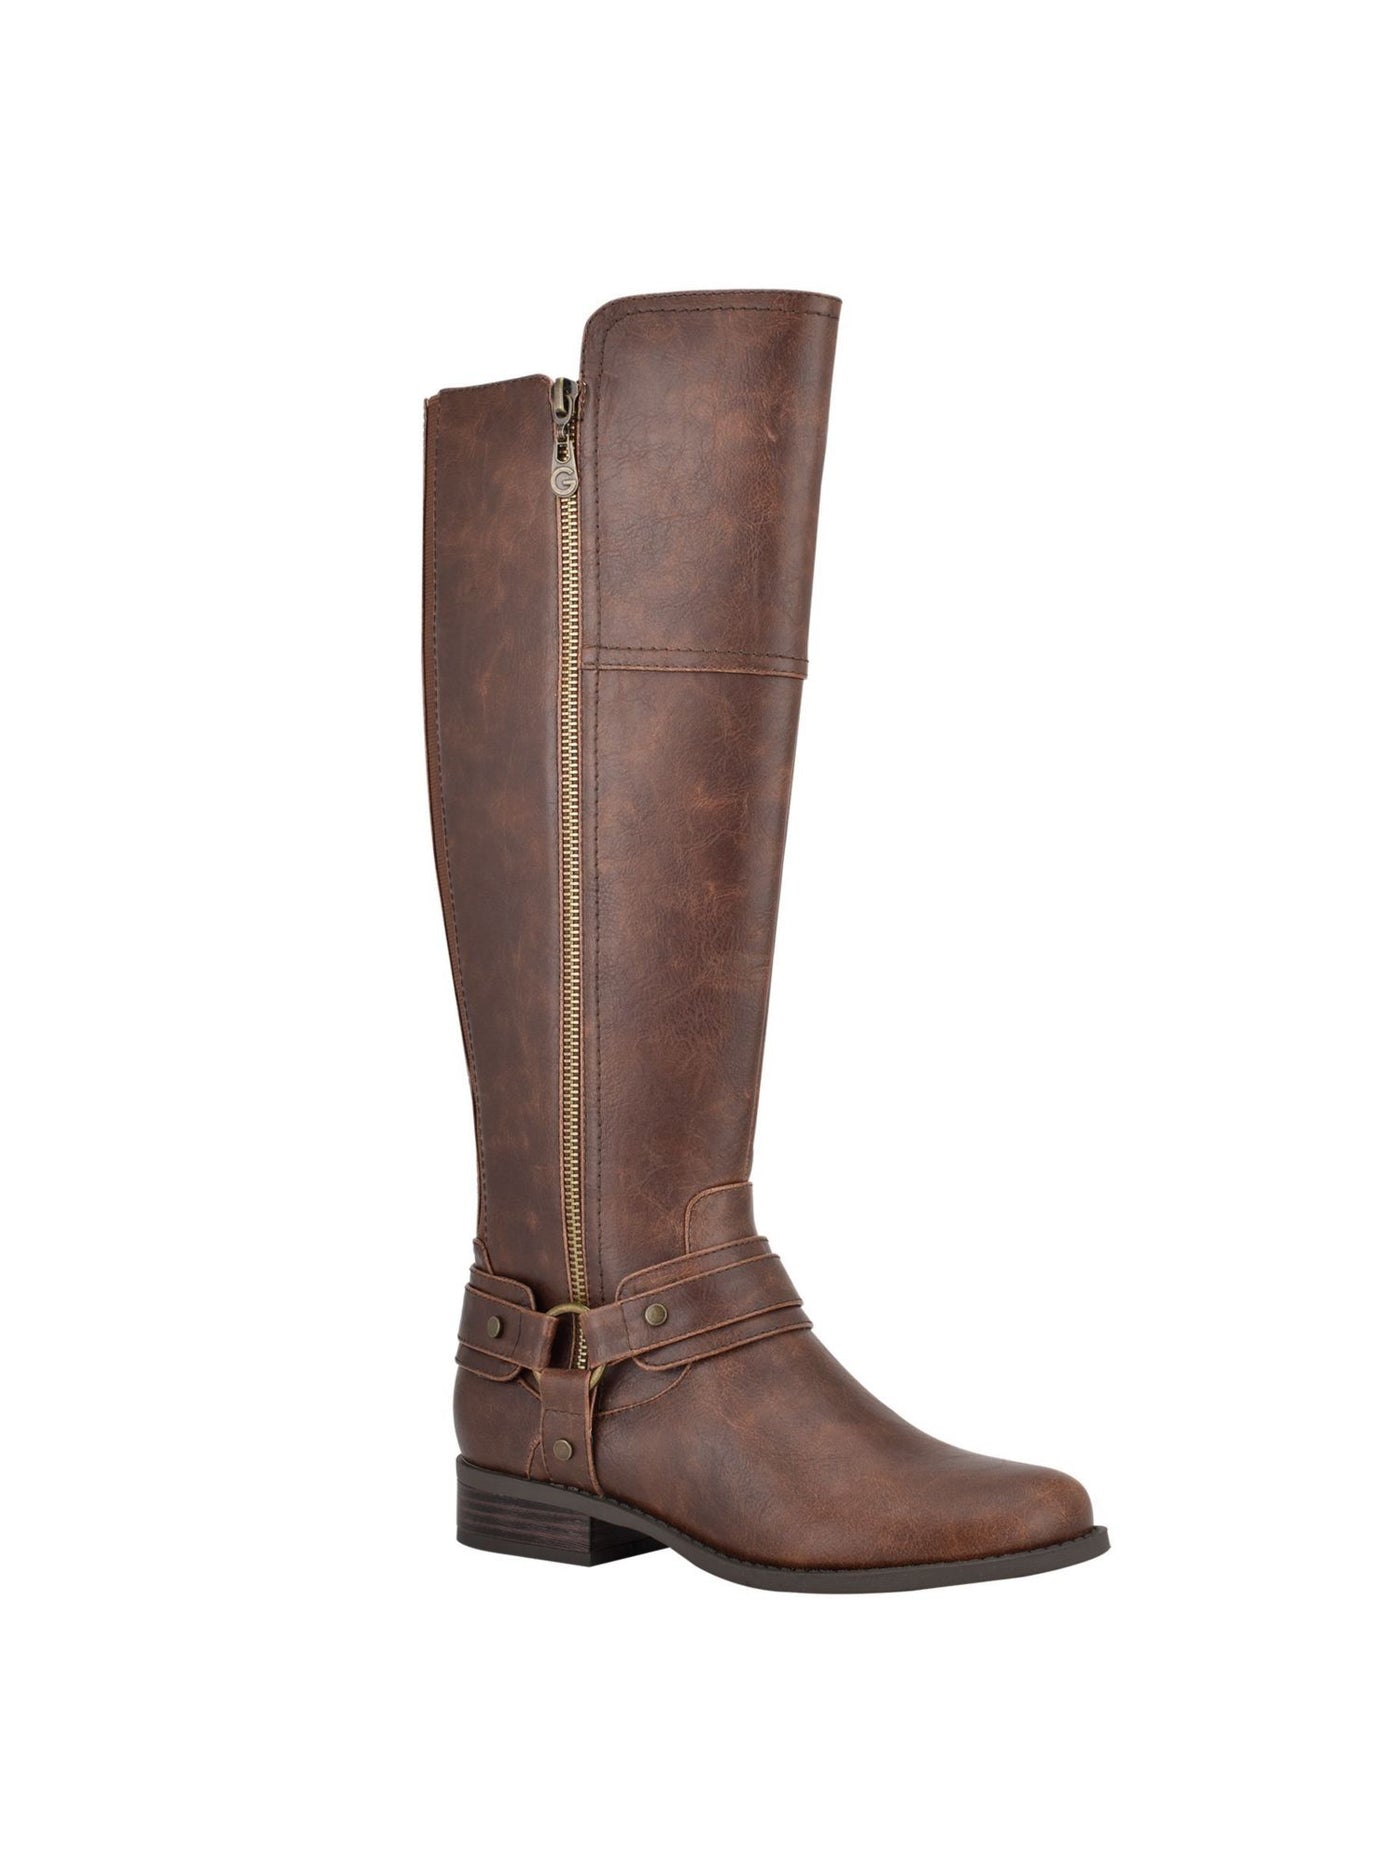 GBG LOS ANGELES Womens Brown Flex Gore Back Accents Gold-Tone Hardware Accent Zipper Accent Buckle Accent Harlea Round Toe Block Heel Zip-Up Riding Boot 5.5 M WC